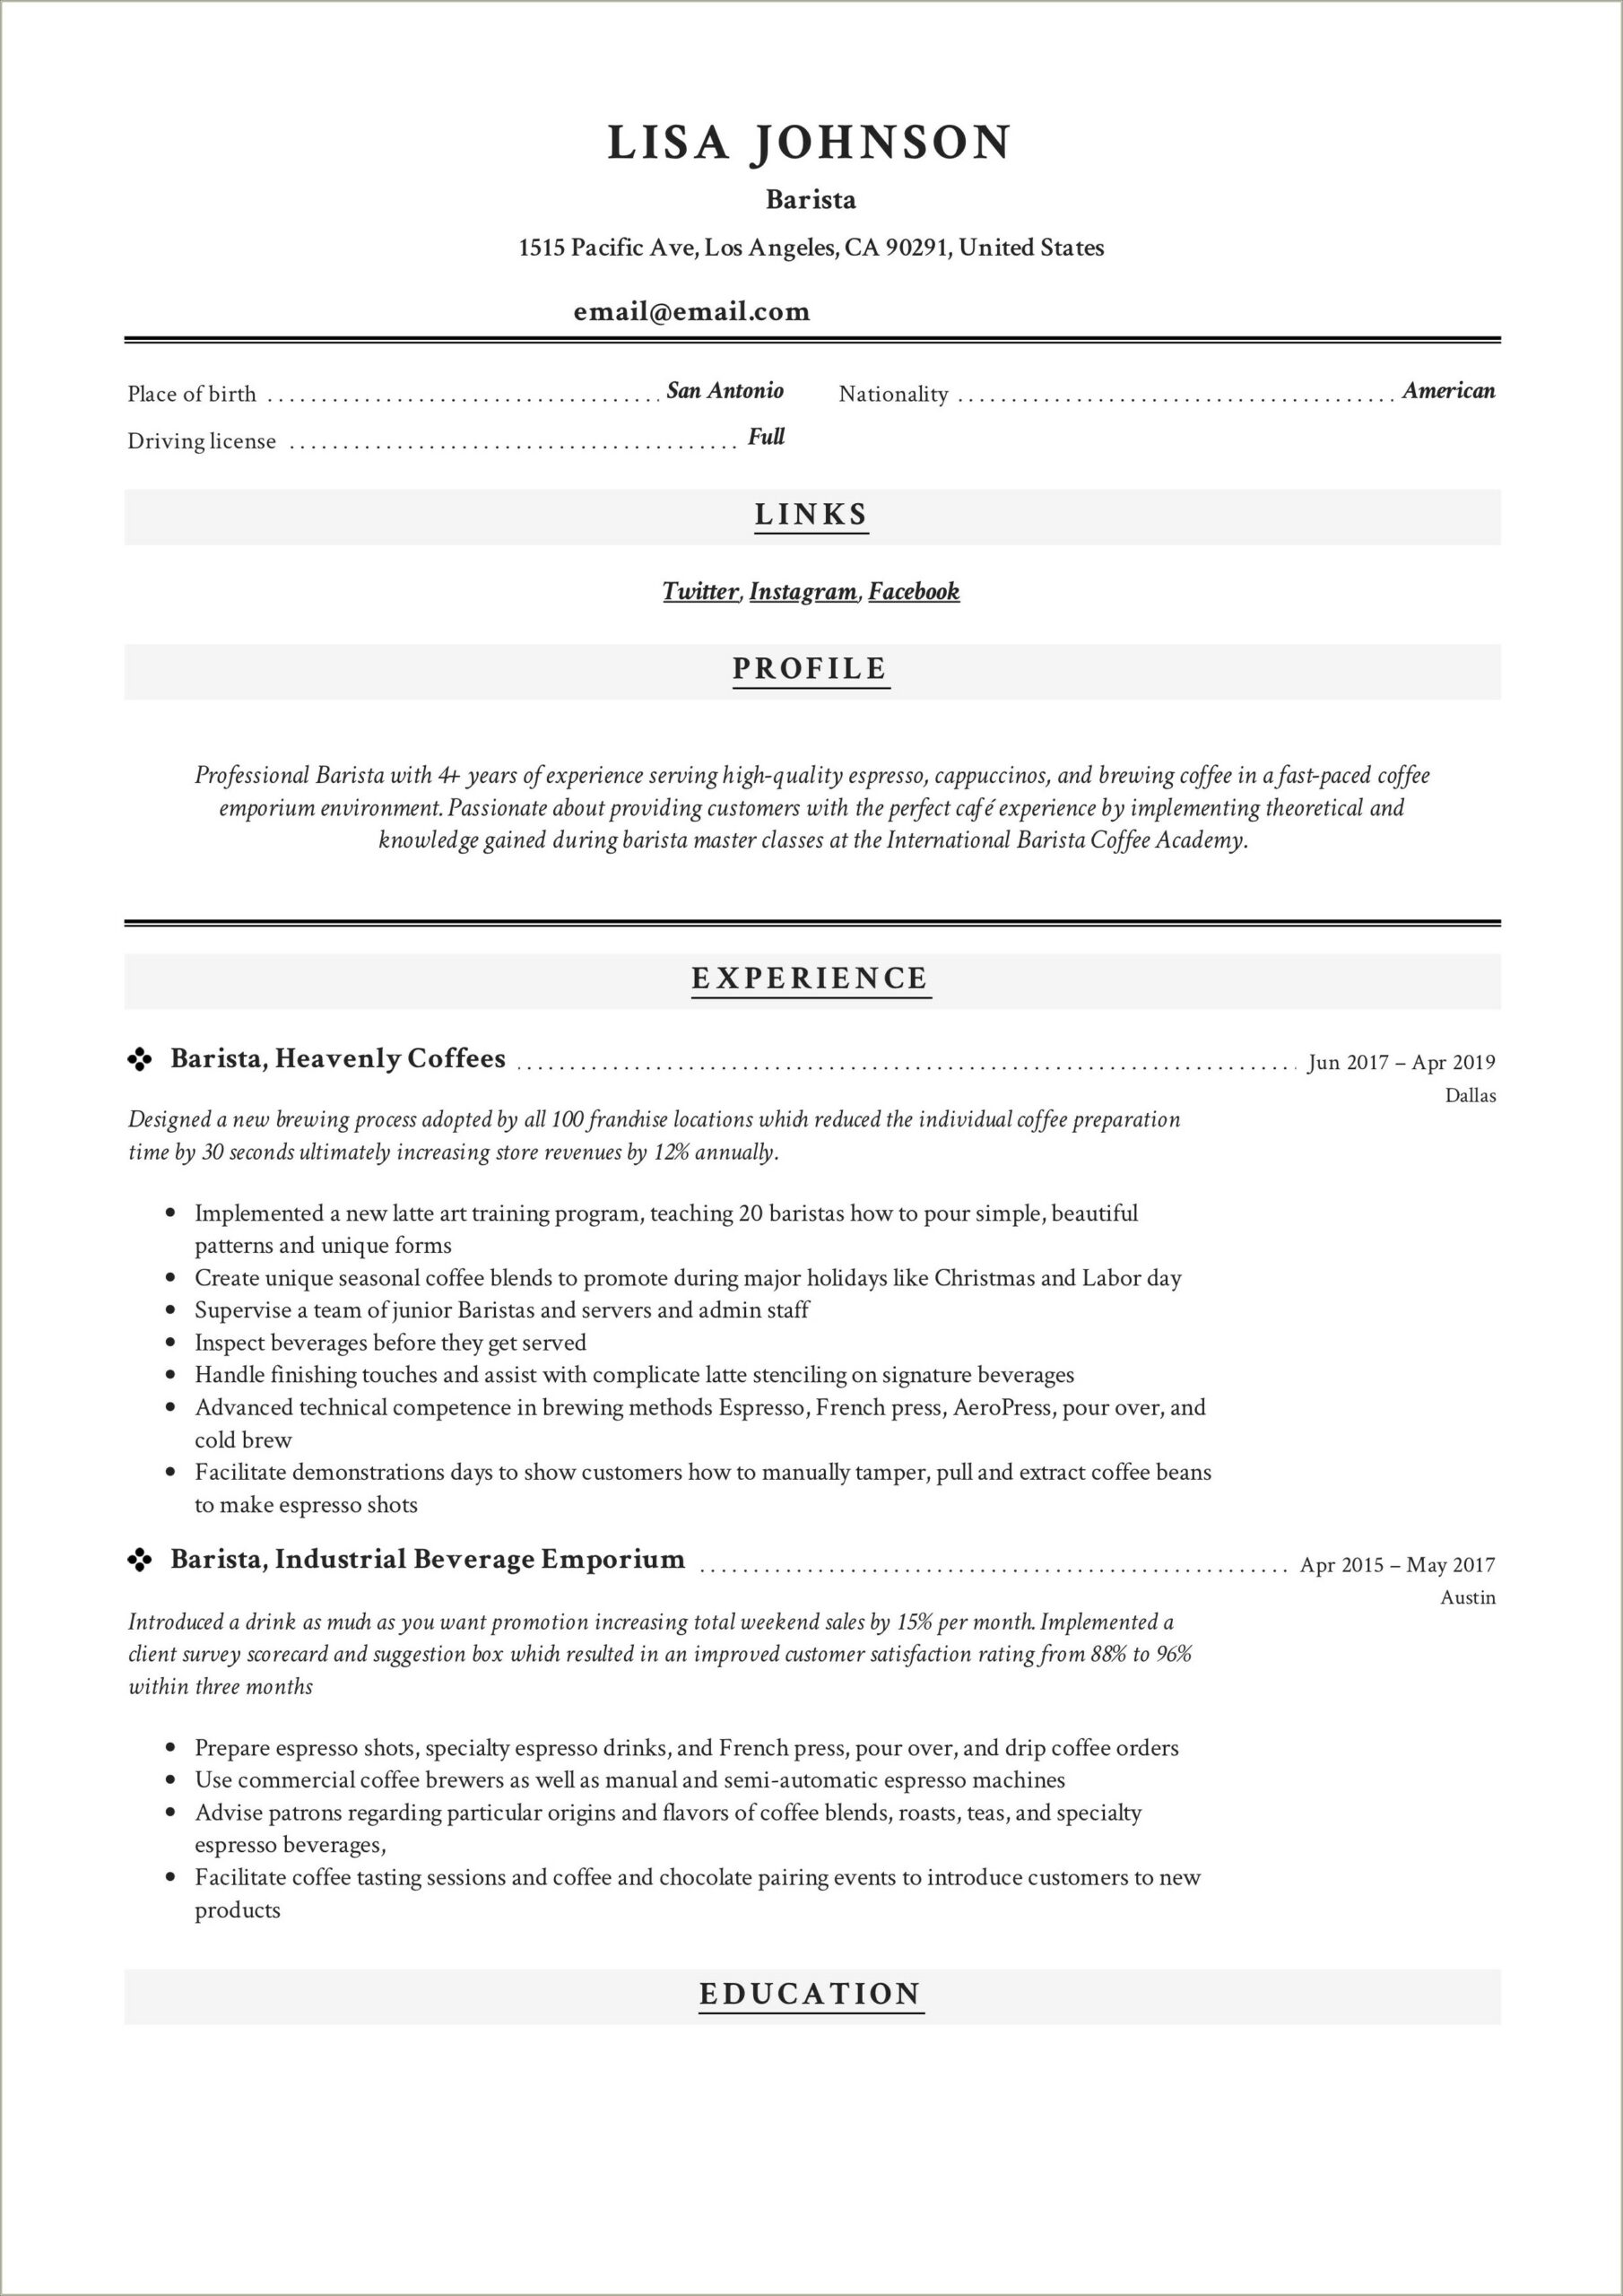 Sample Resume For Barista Position With No Experience